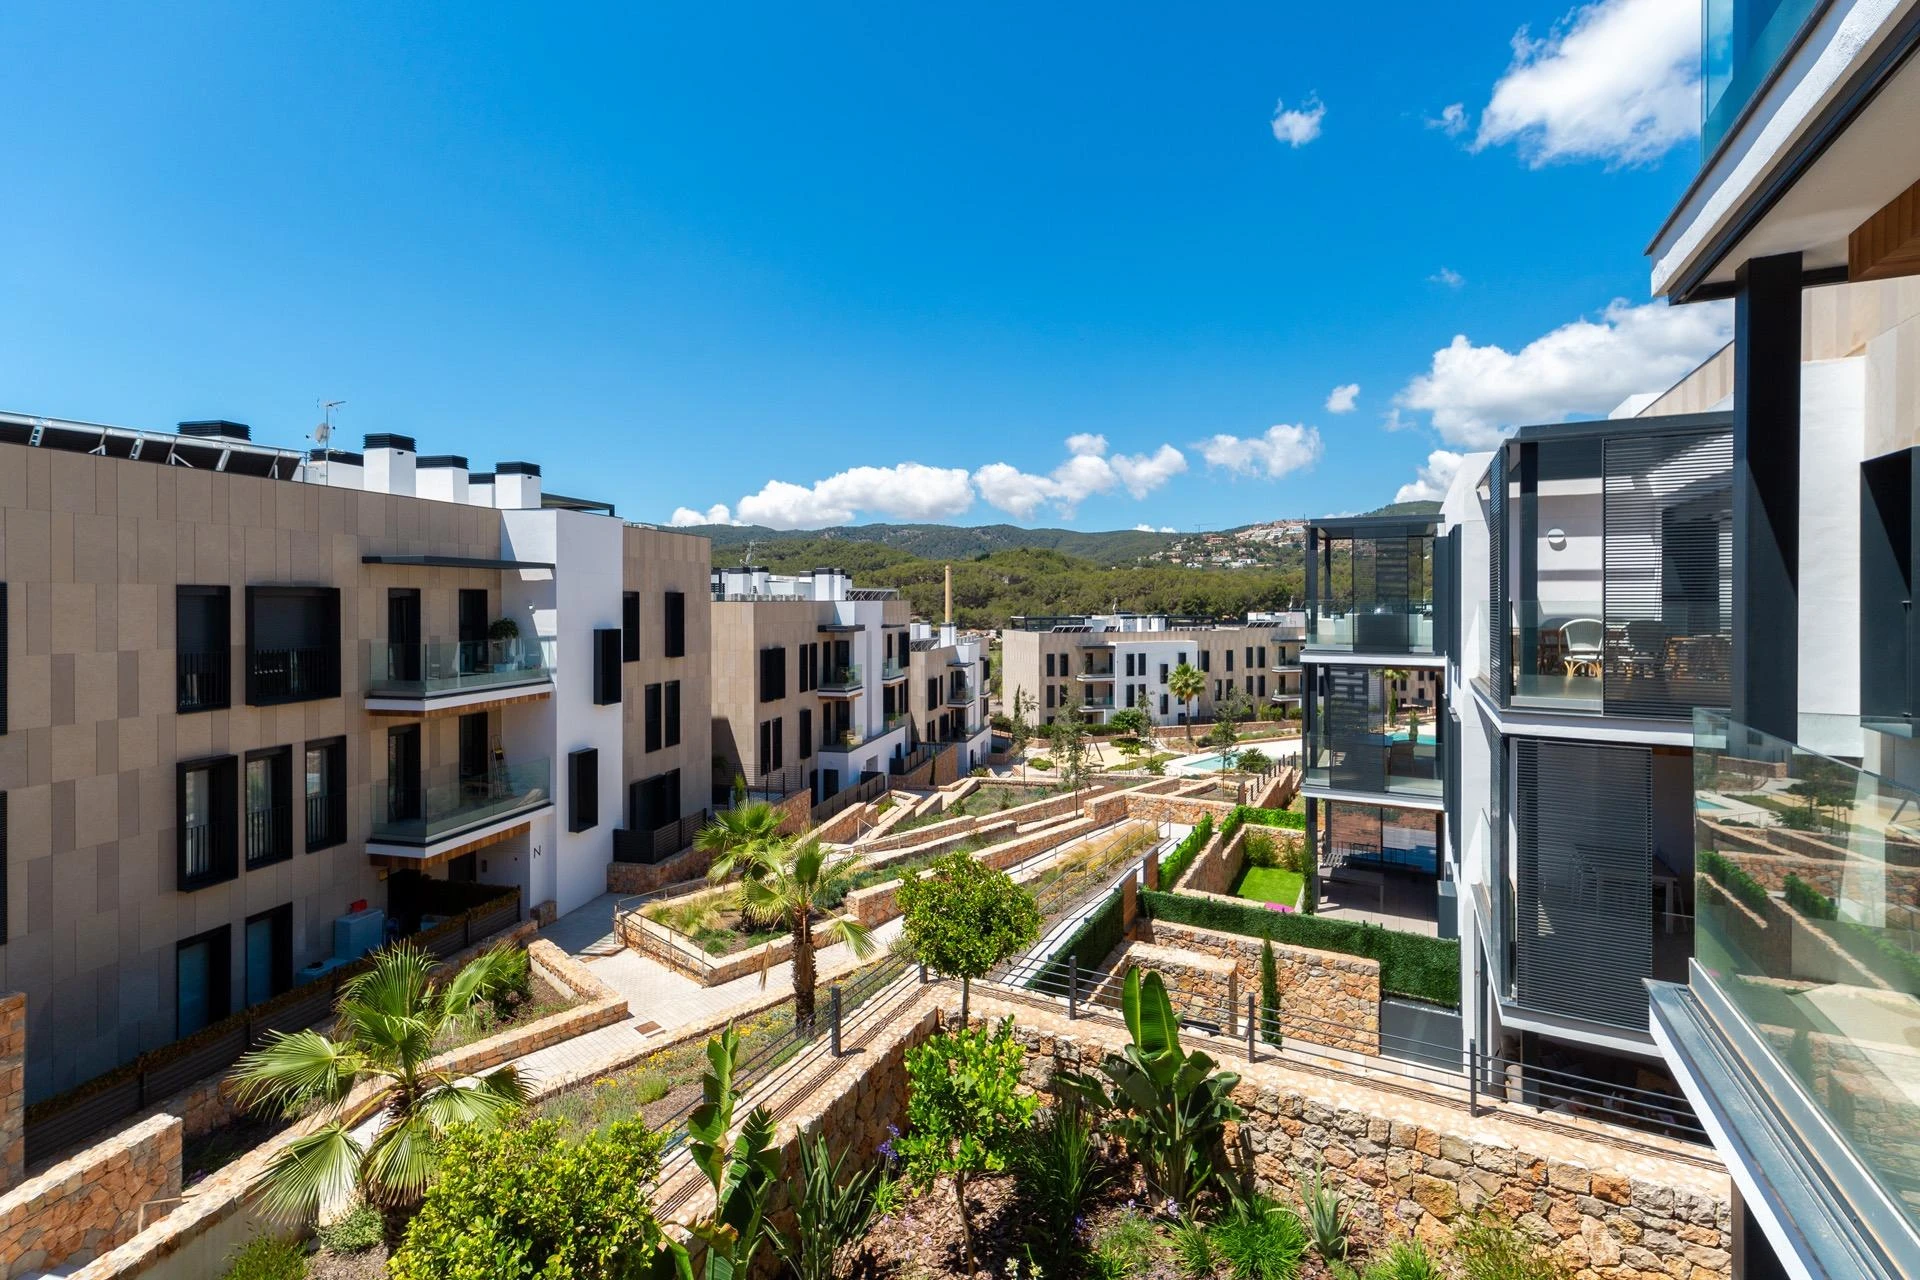 Modern brand new flat in a well-kept complex facing the golf course and unobstructed mountain views.